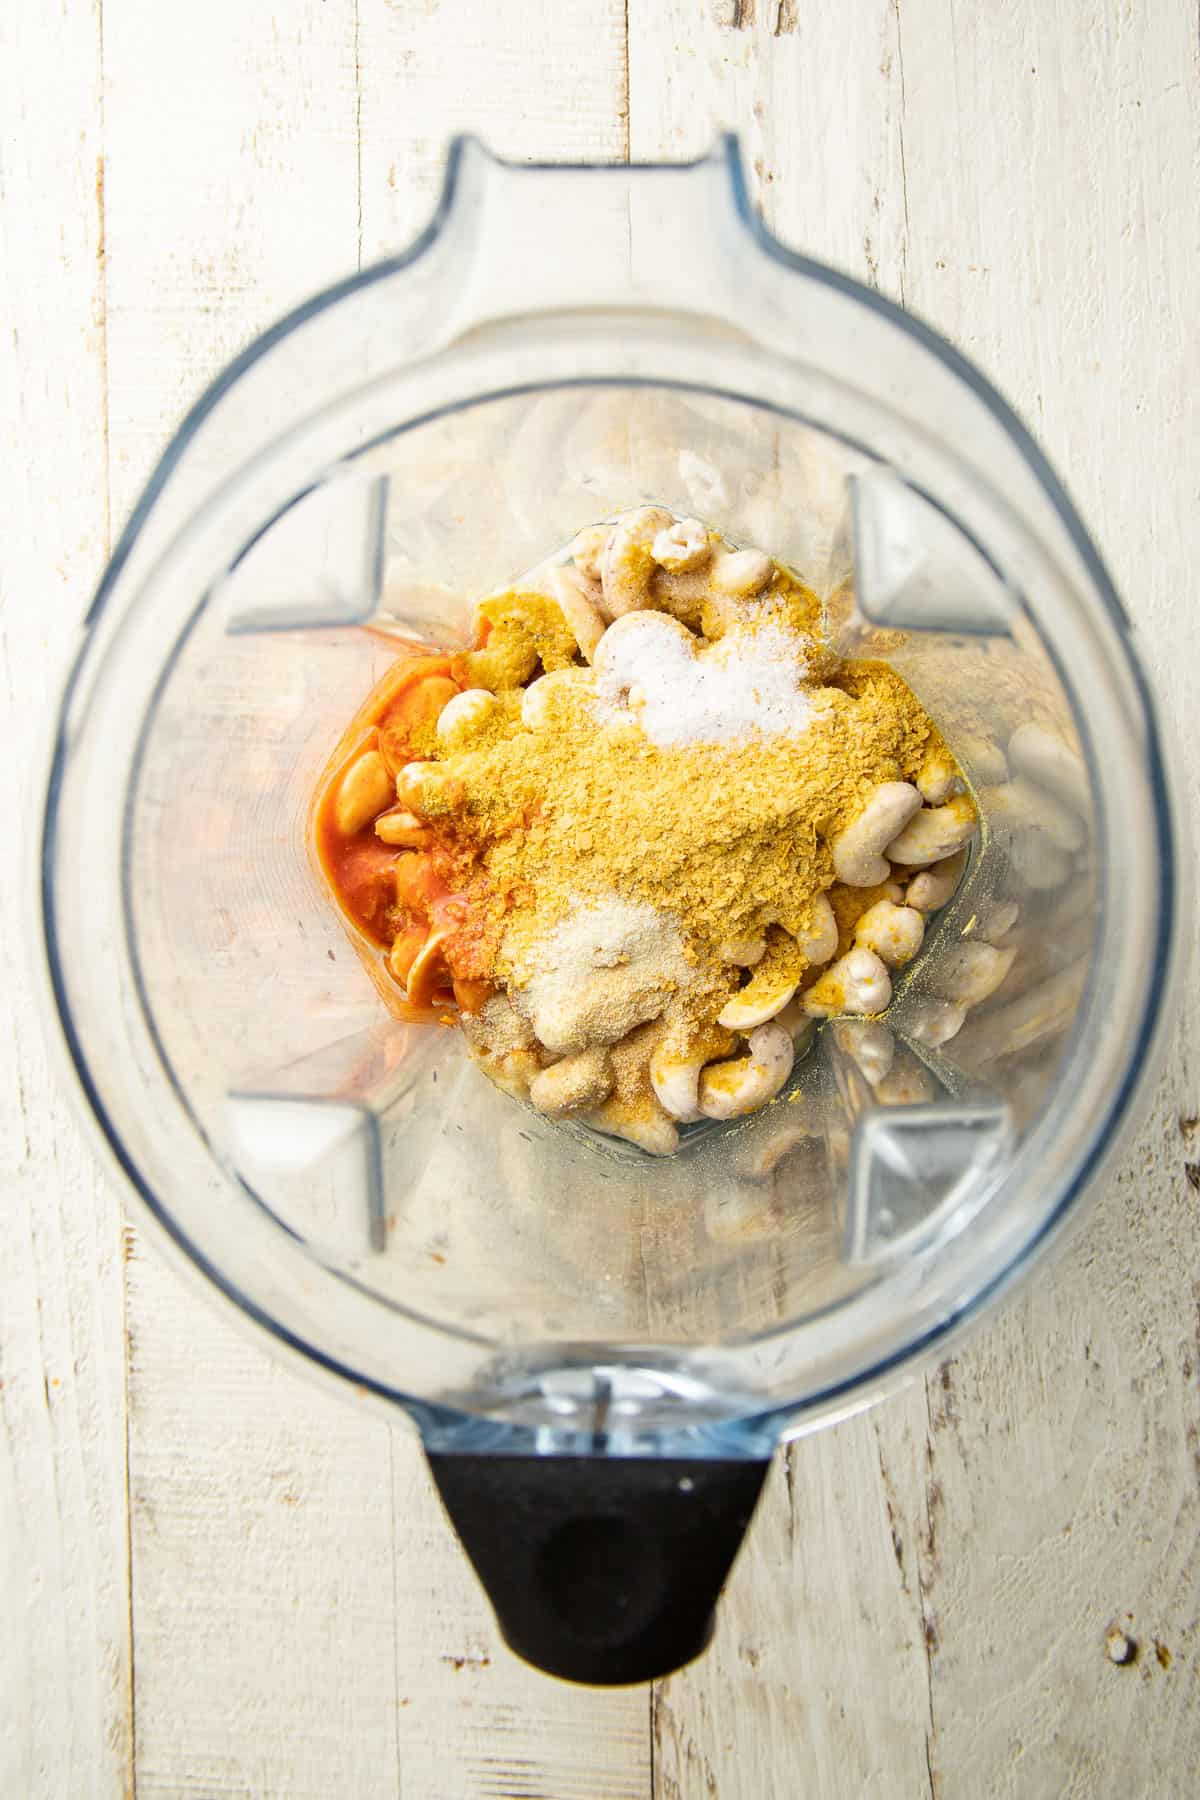 Cashew queso ingredients in a blender before blending.